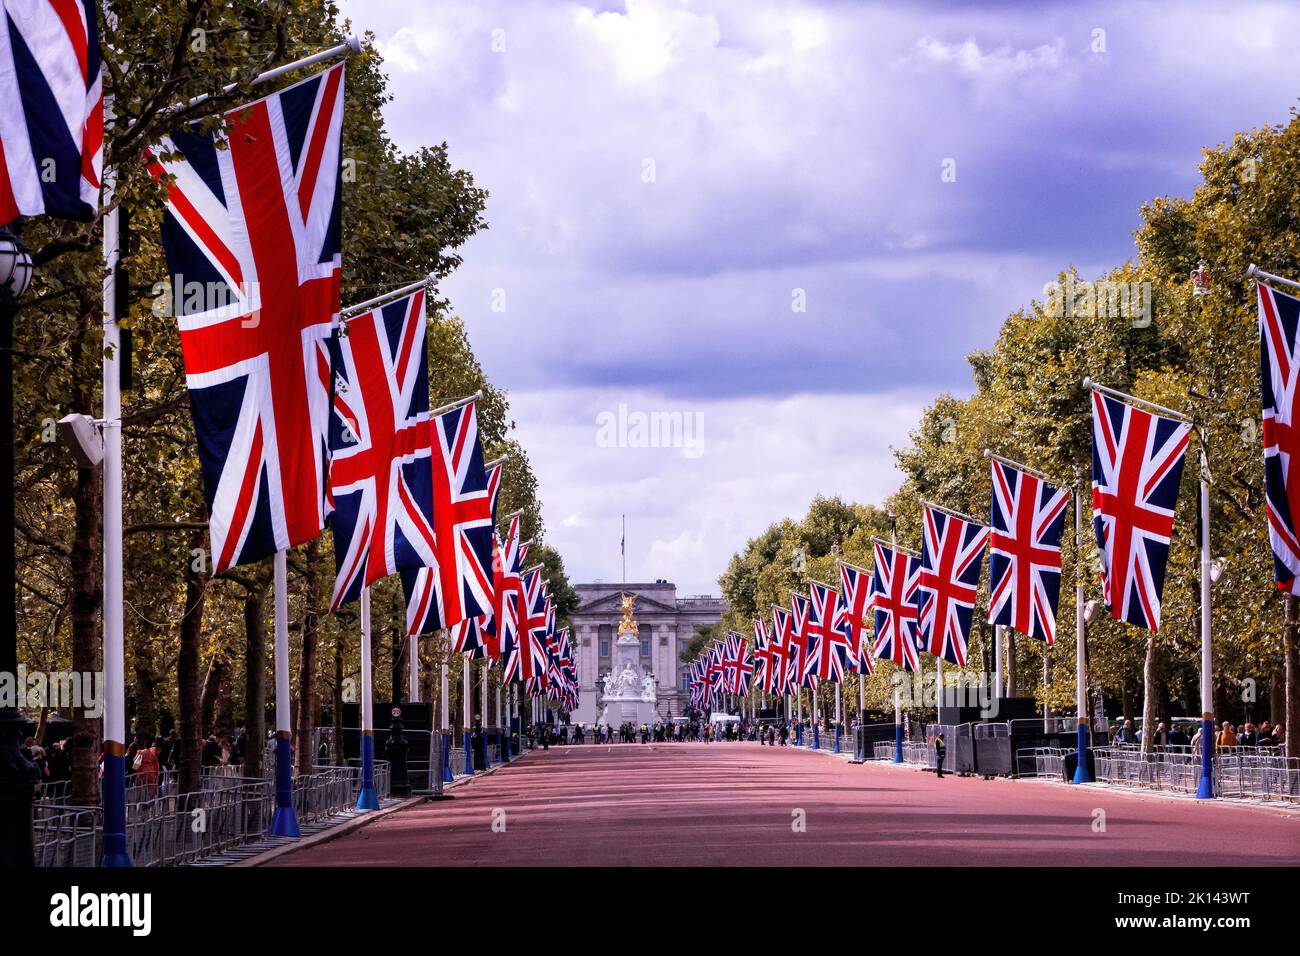 The Mall London where people were paying respects to HRH Queen Elizabeth II.Lambeth Bridge London UK Stock Photo